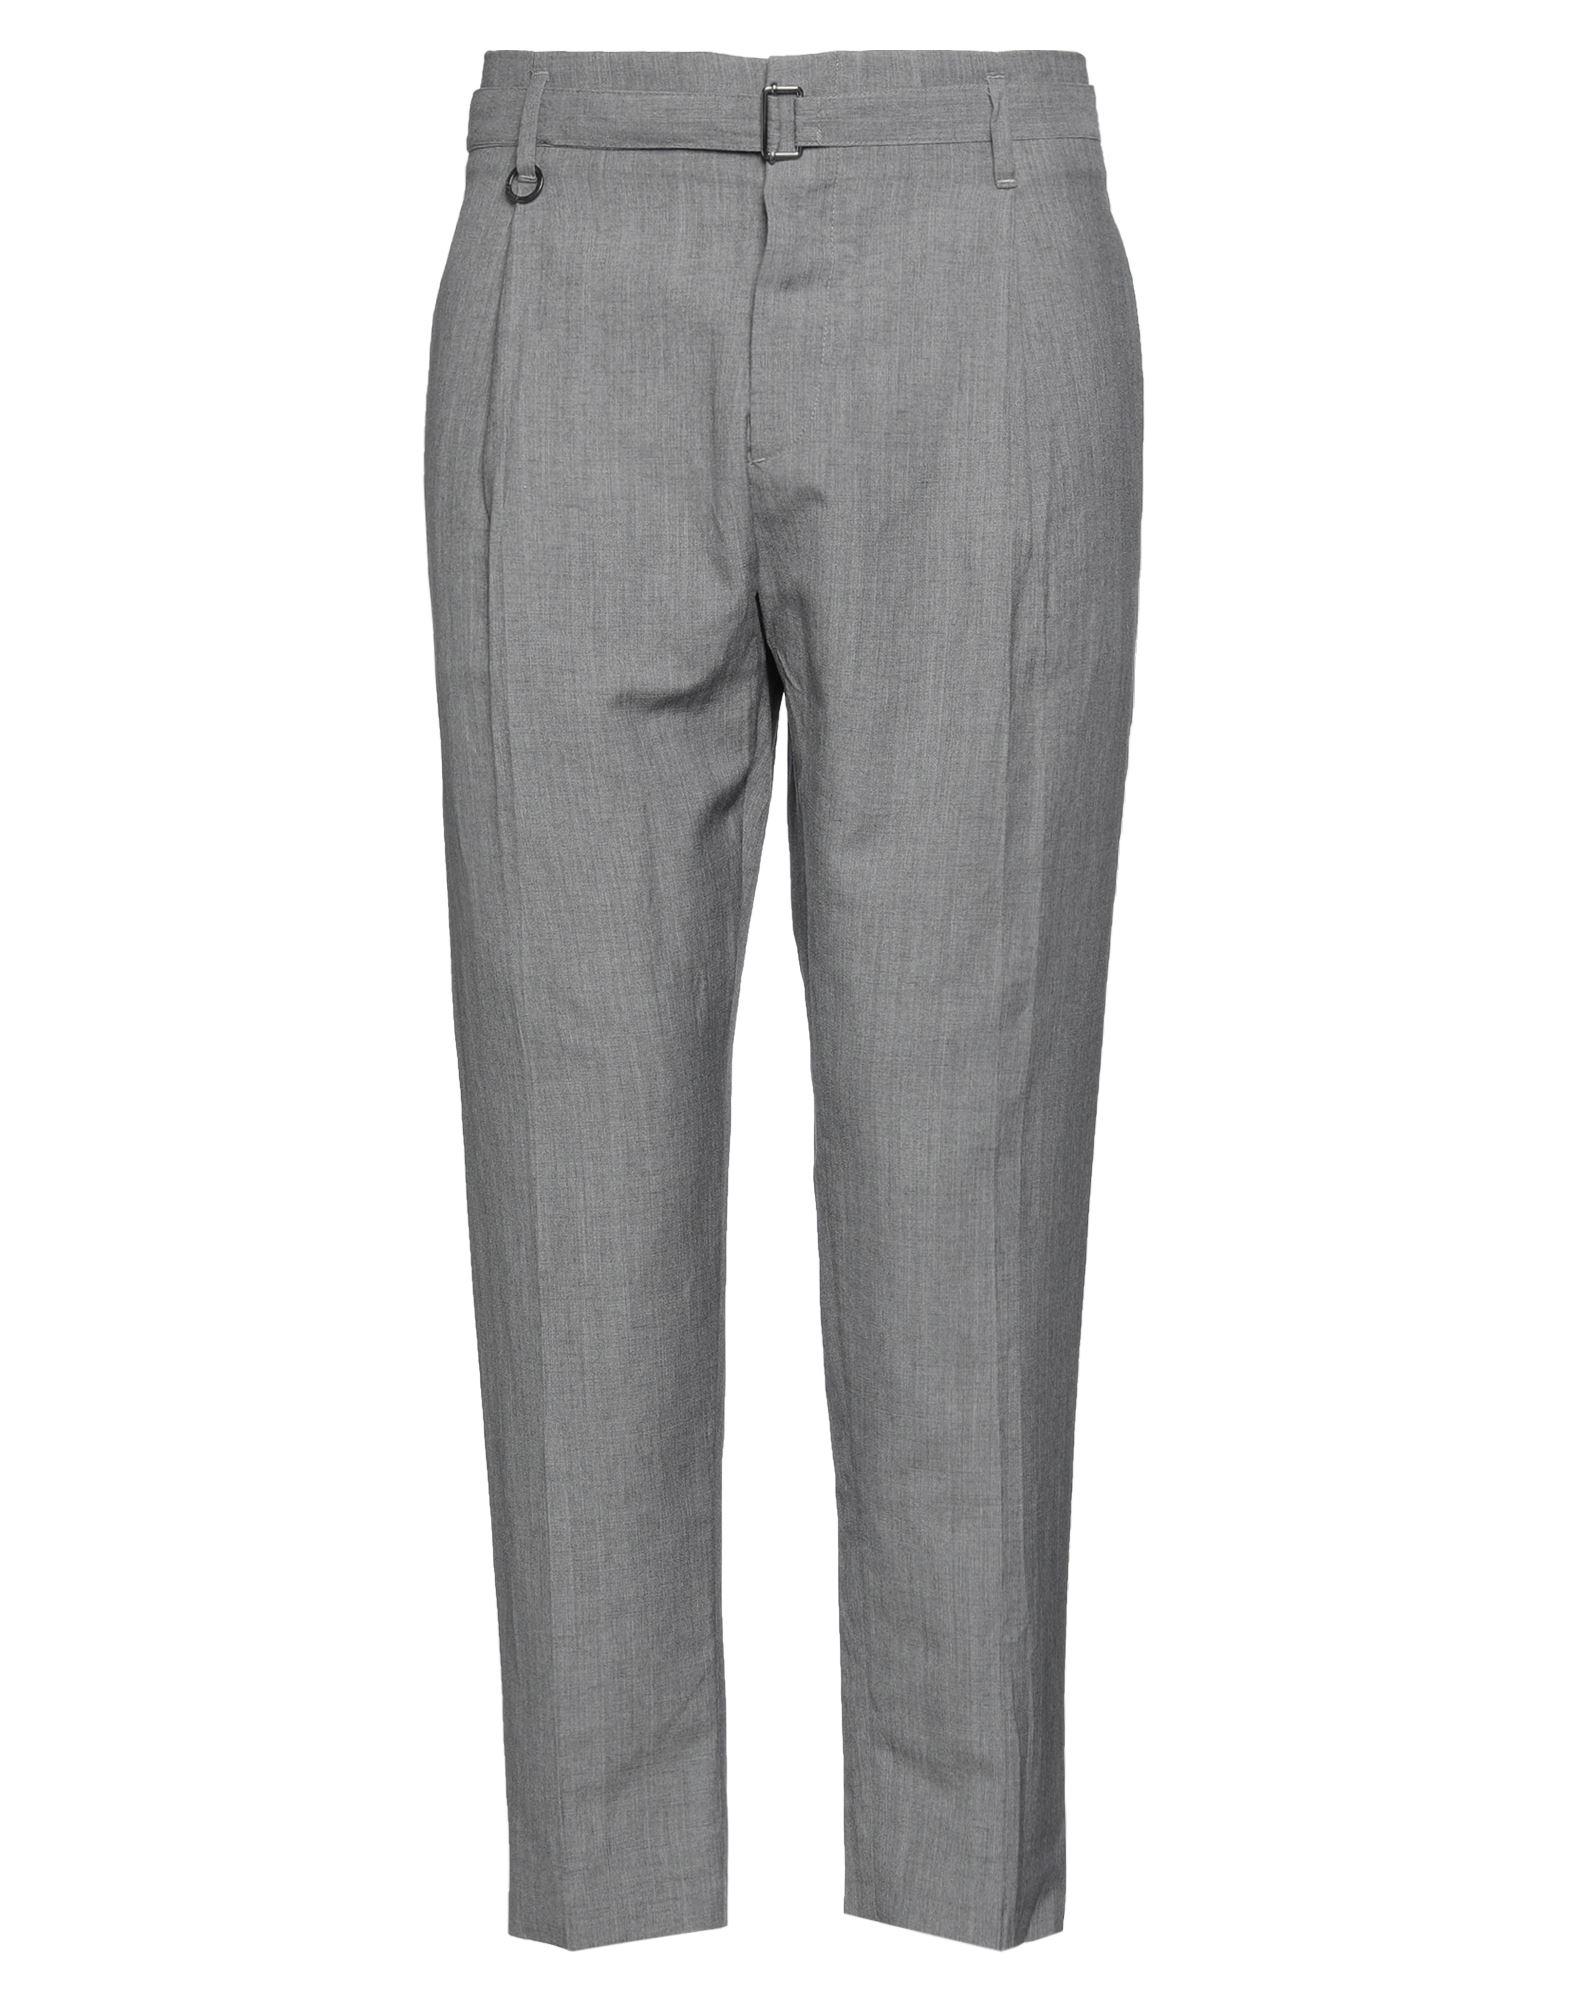 BE ABLE BE ABLE MAN PANTS GREY SIZE 36 WOOL, LINEN